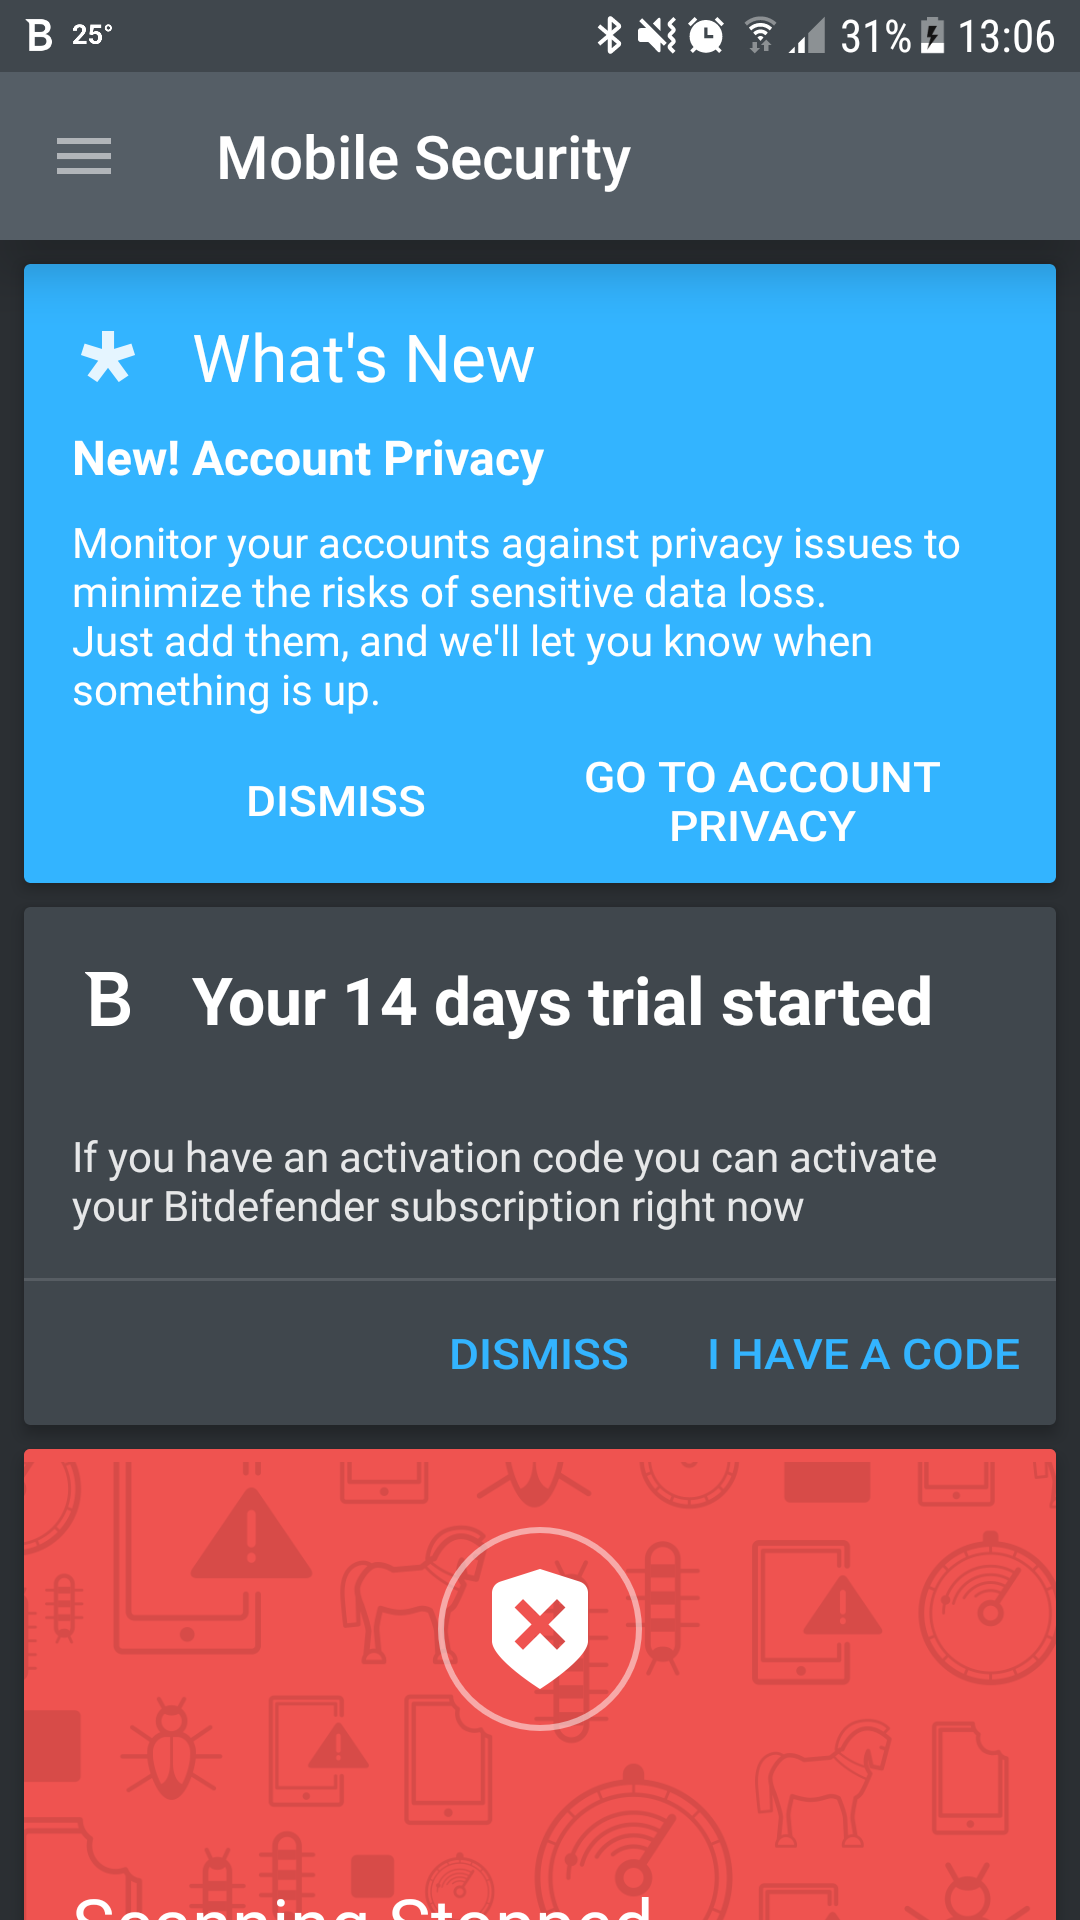 (12.42$) Bitdefender Mobile Security for Android Key (1 Year / 1 Device)